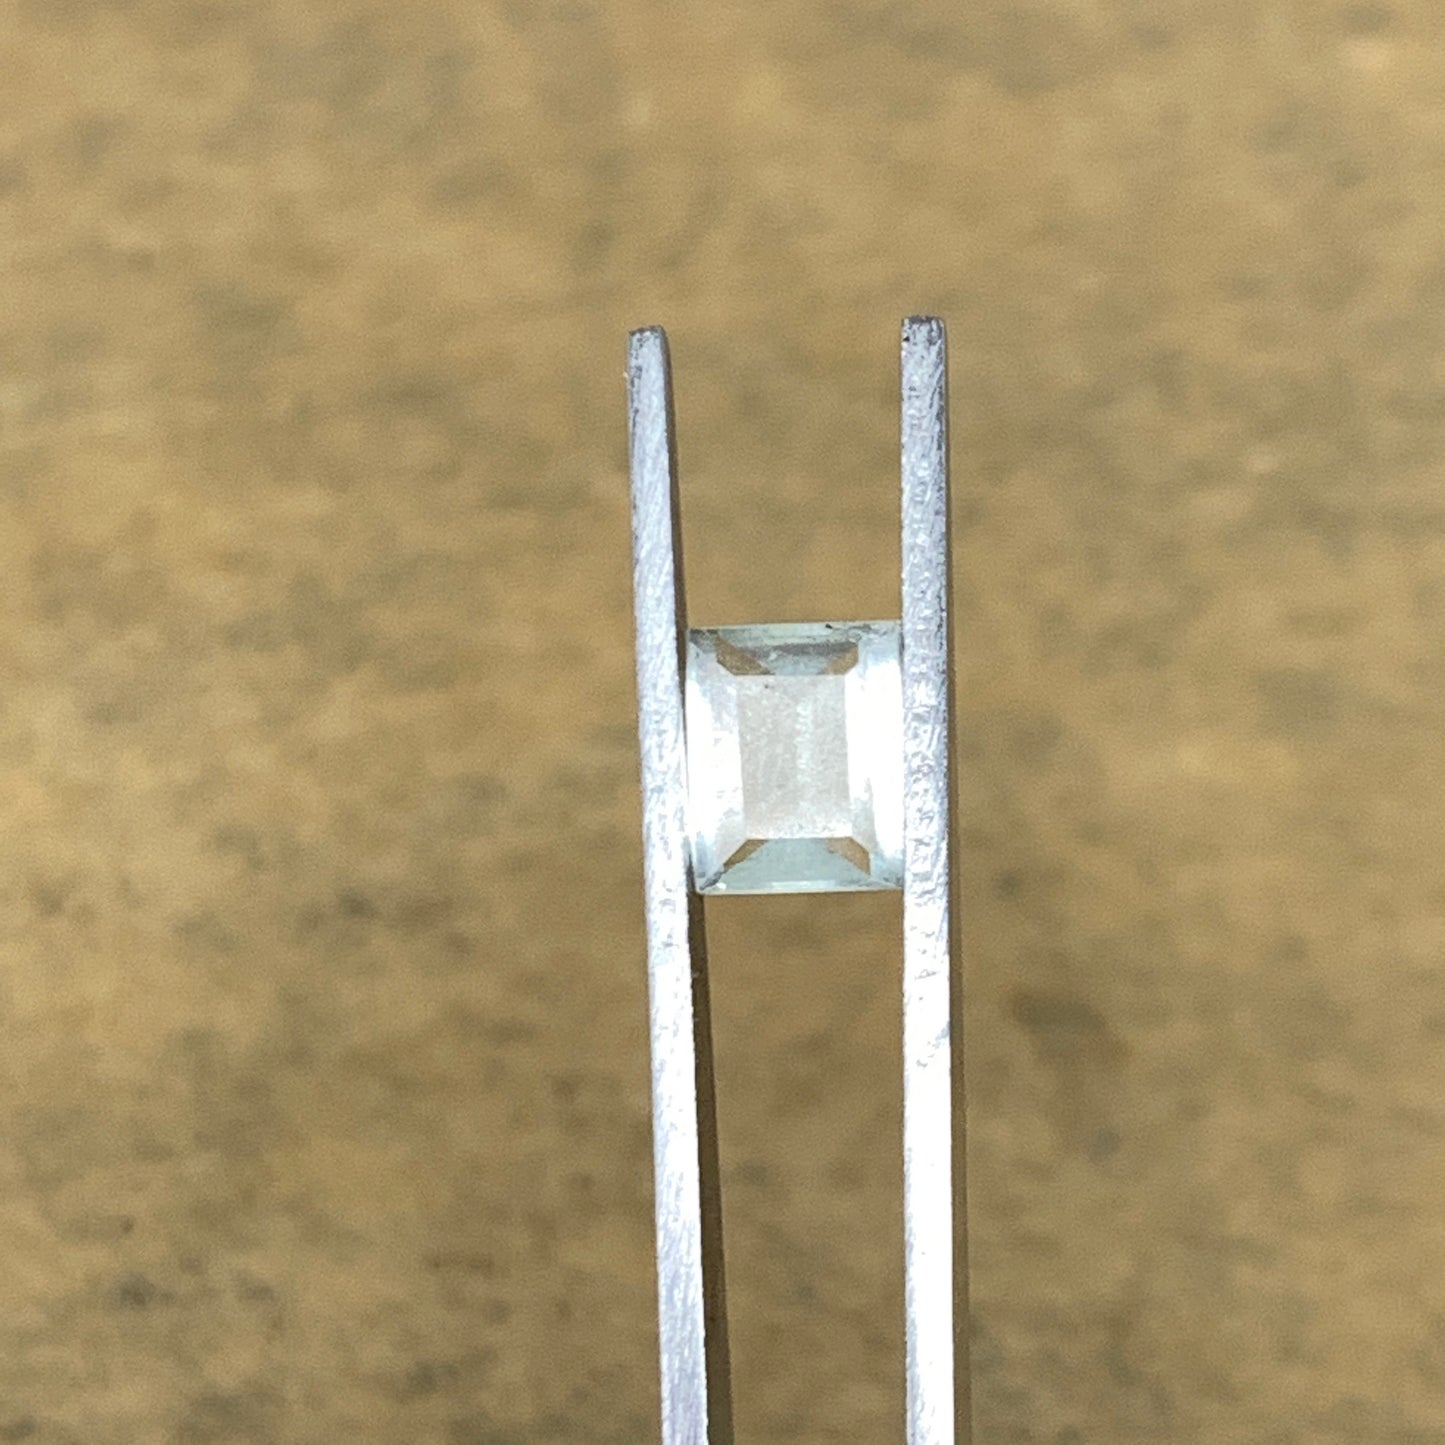 1.15cts, 7mmx5mmx3mm, Aquamarine Crystal Facetted Stone Loose @Pakistan,CTS212